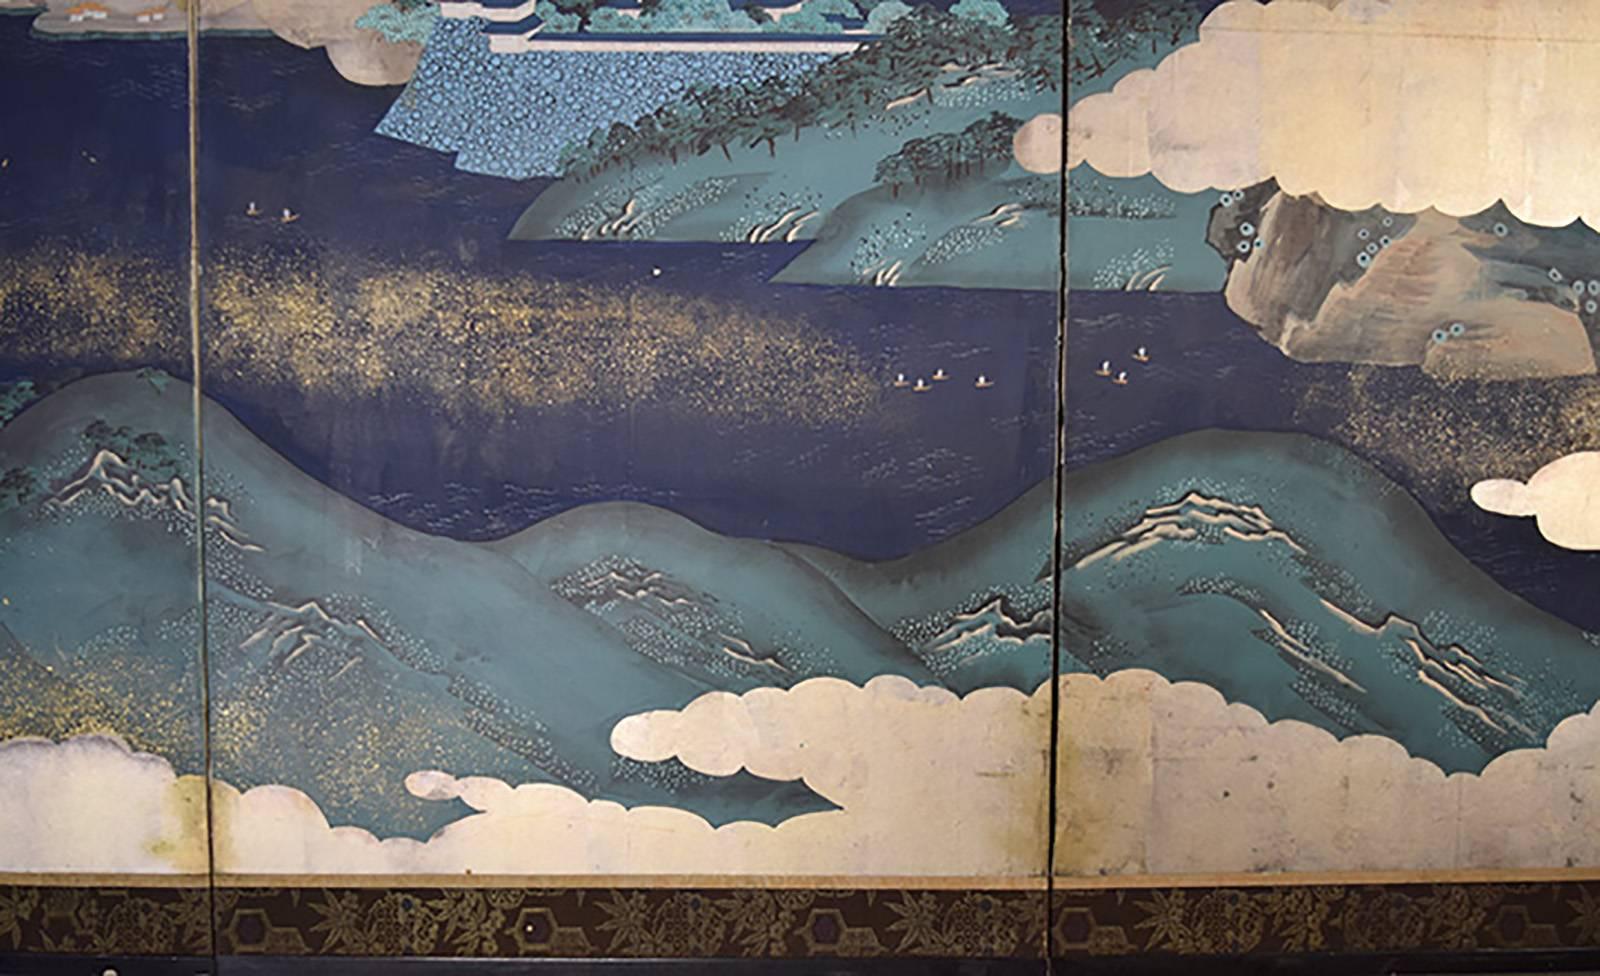 Originally used to define living spaces and block drafts, Japanese screens also provided artists with a large surface for paintings. Secured by paper hinges, the panels present a seamless surface for continuous compositions such as this beautifully